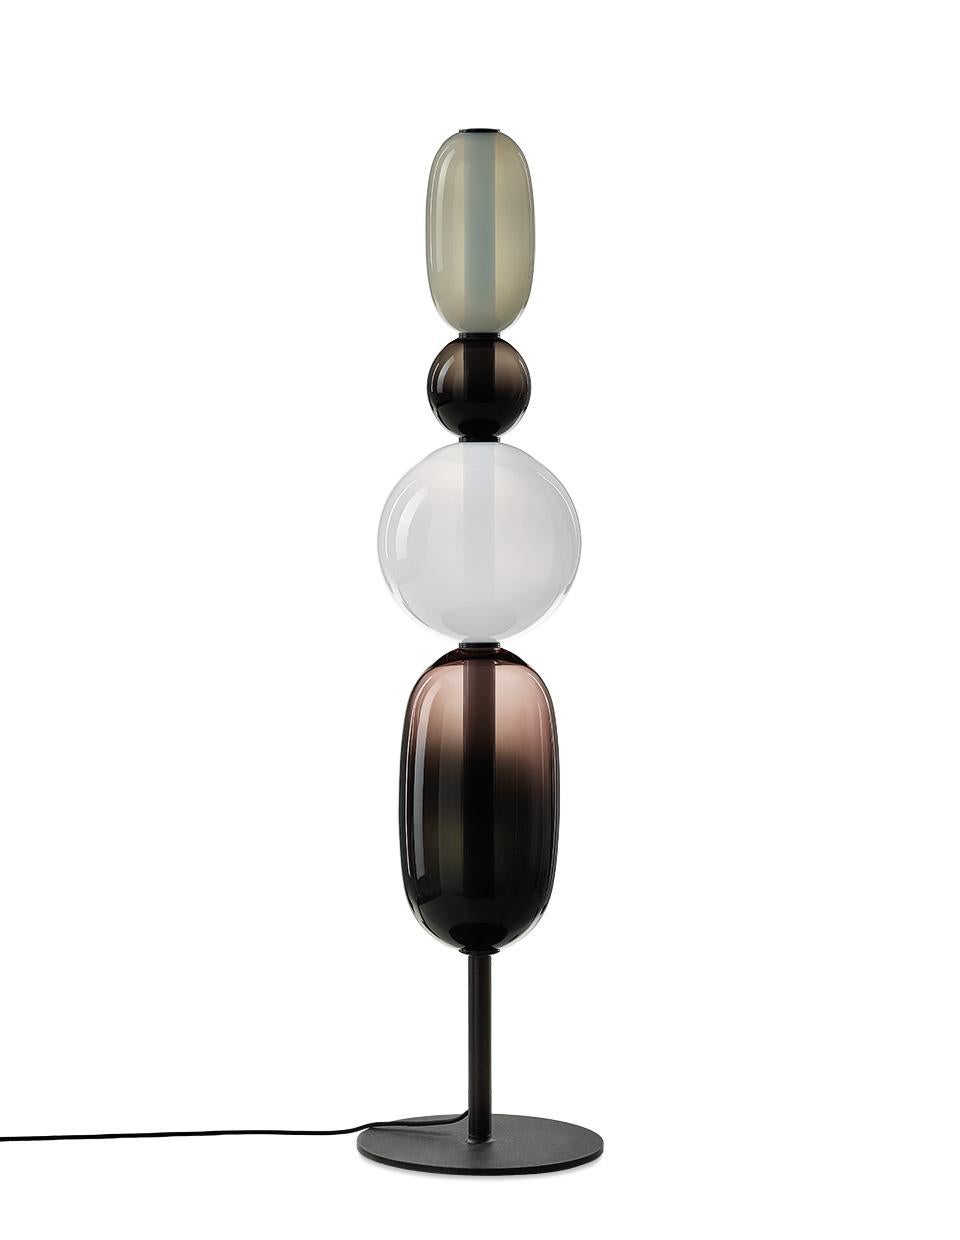 Contemporary blown crystal glass floor lamp - pebbles by Boris Klimek for Bomma

Pebbles are reminders of exceptional moments or favorite places. Their diverse shapes and colors inspired BOMMA’s playful collection that invites you to express your